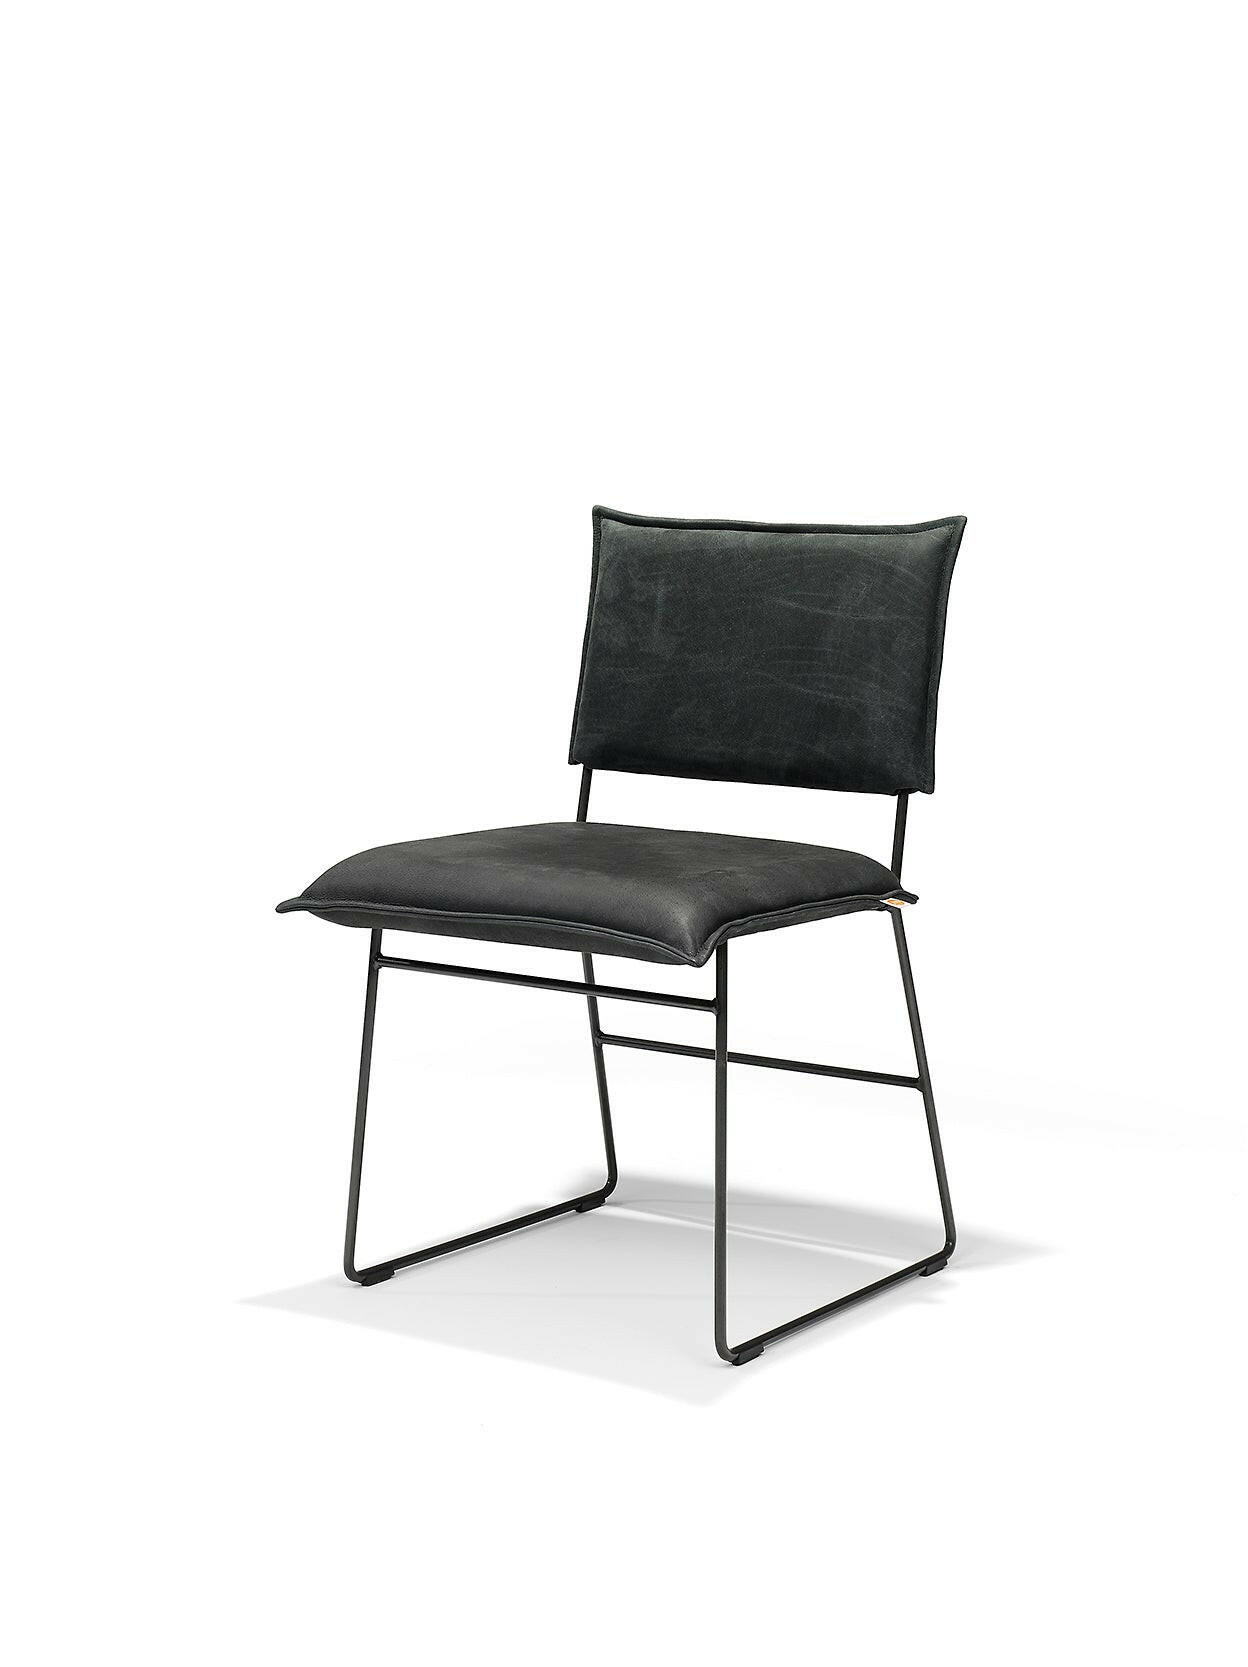 Norman 12mm Old Glory Frame - Chair